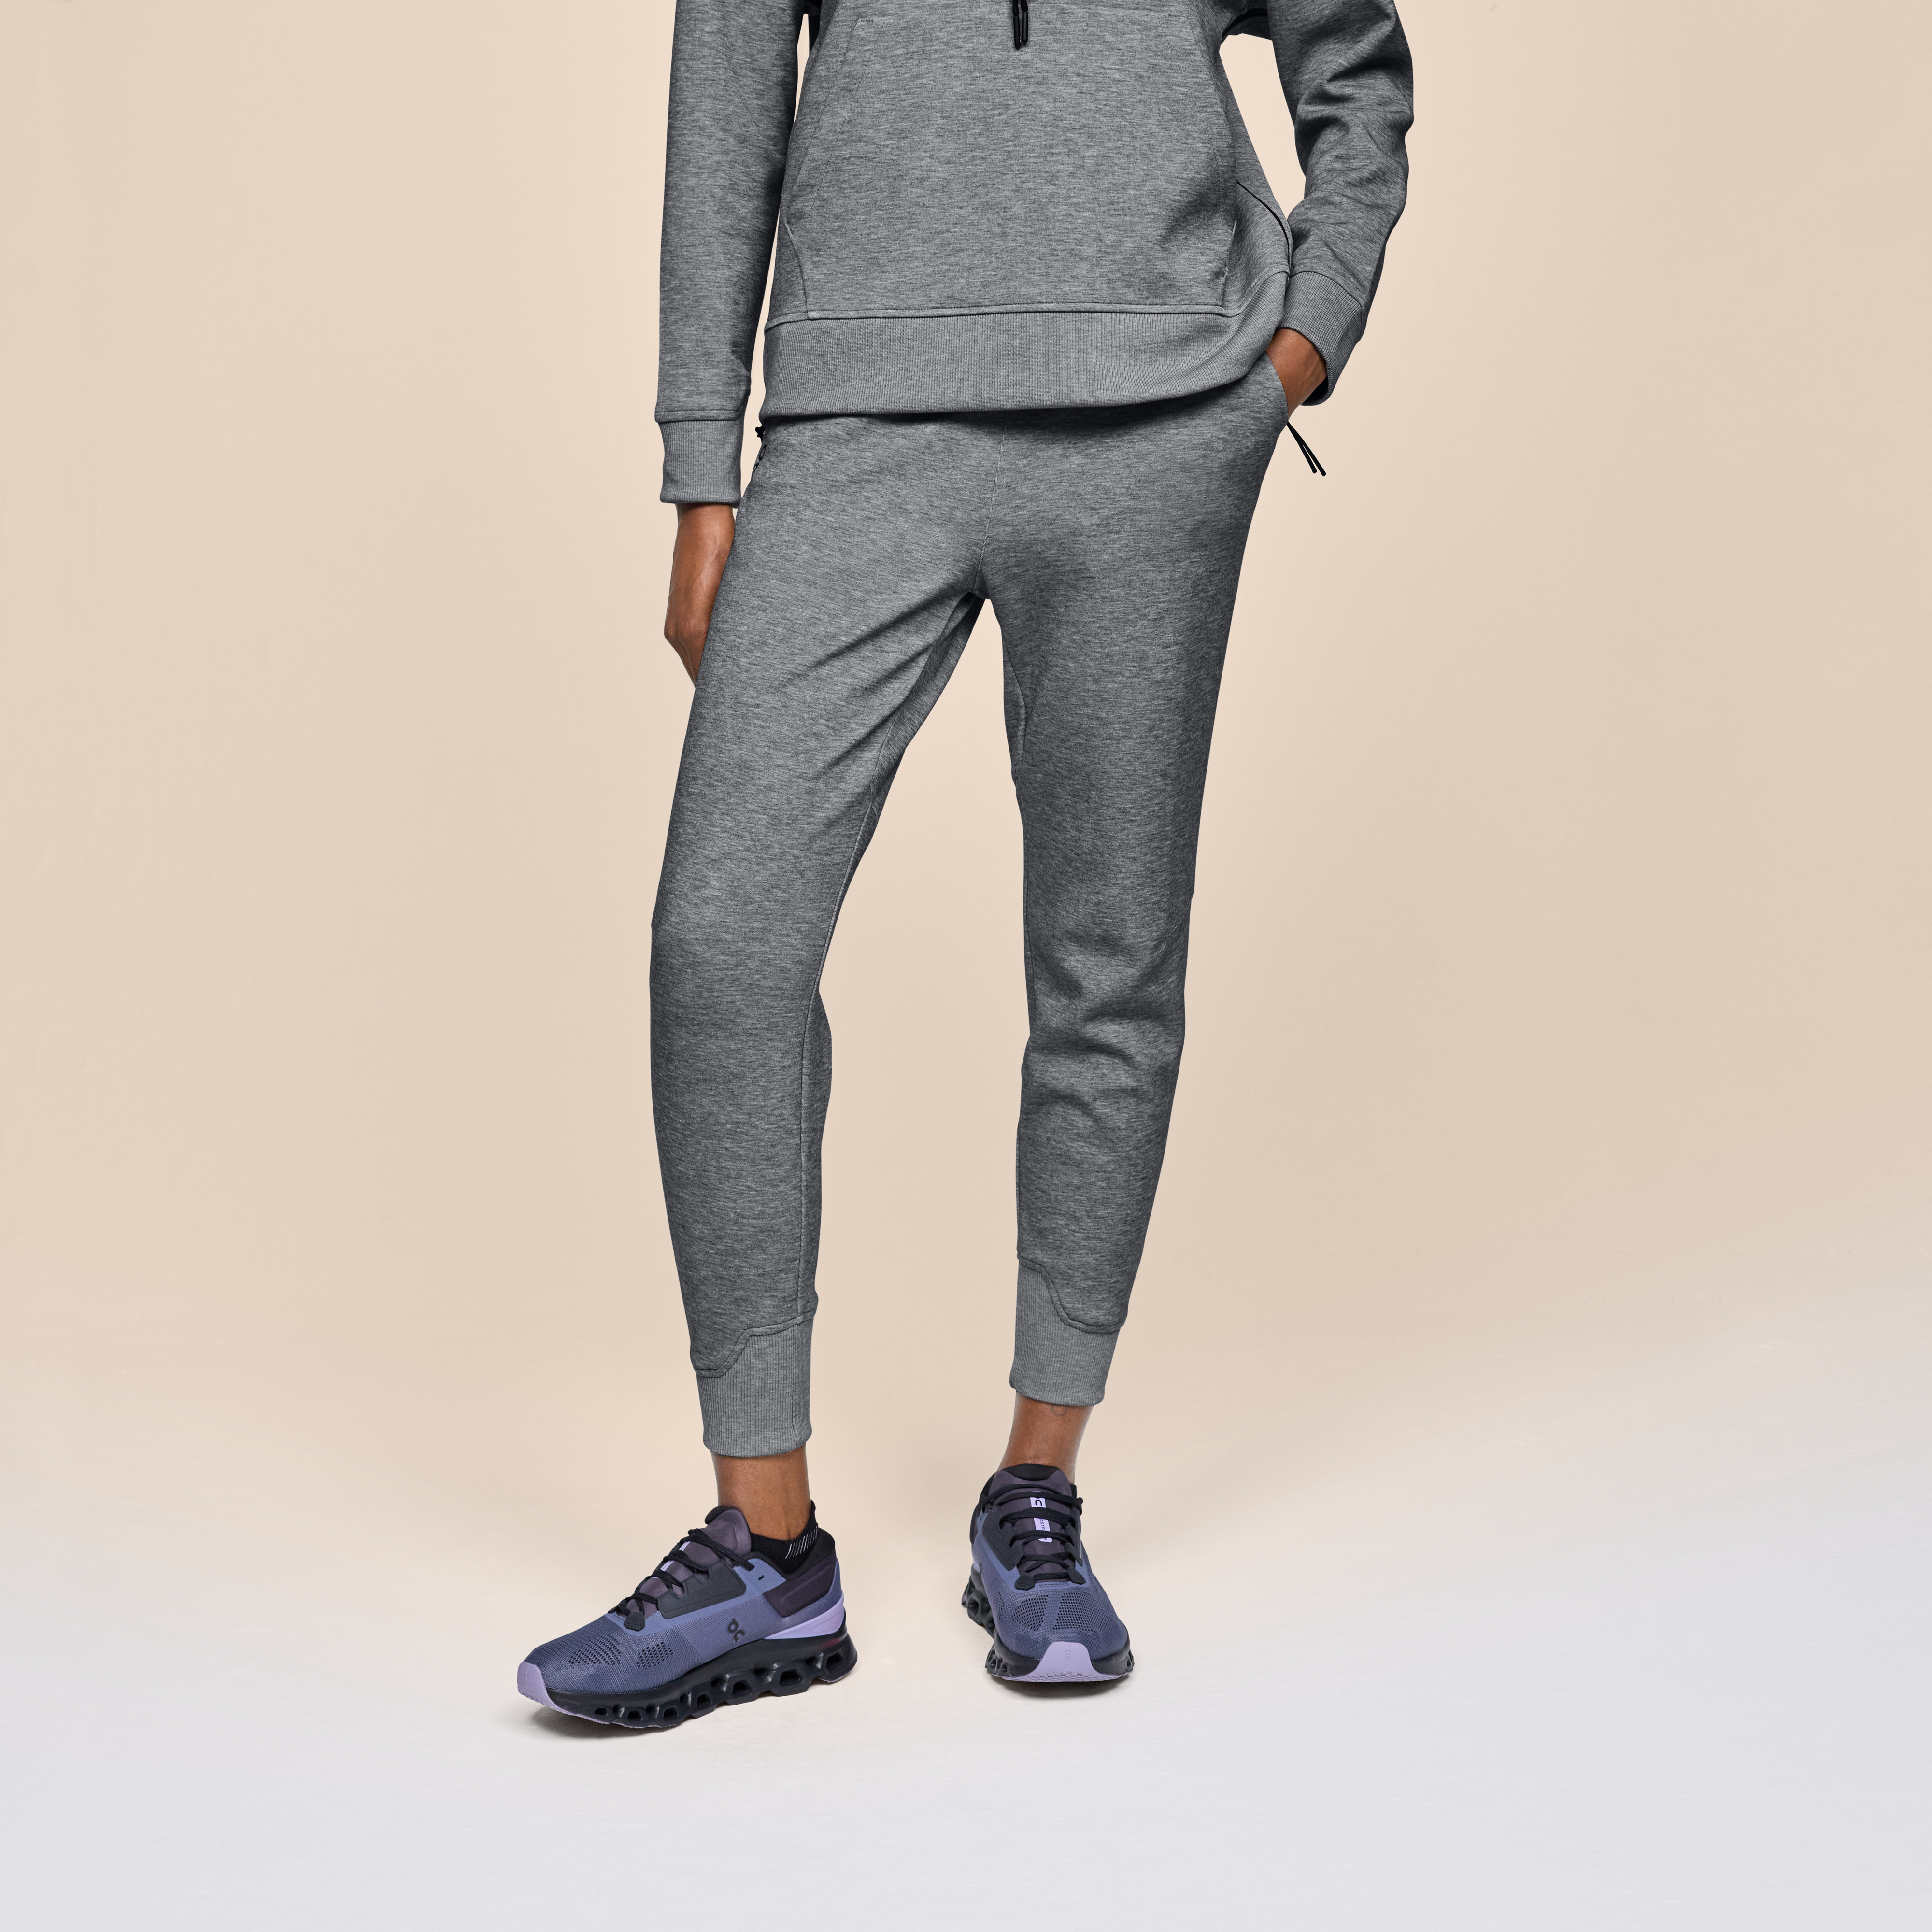 On Sweat Pants Grey Women Women - Recovery, pre- or post-workout, soft comfort Pants